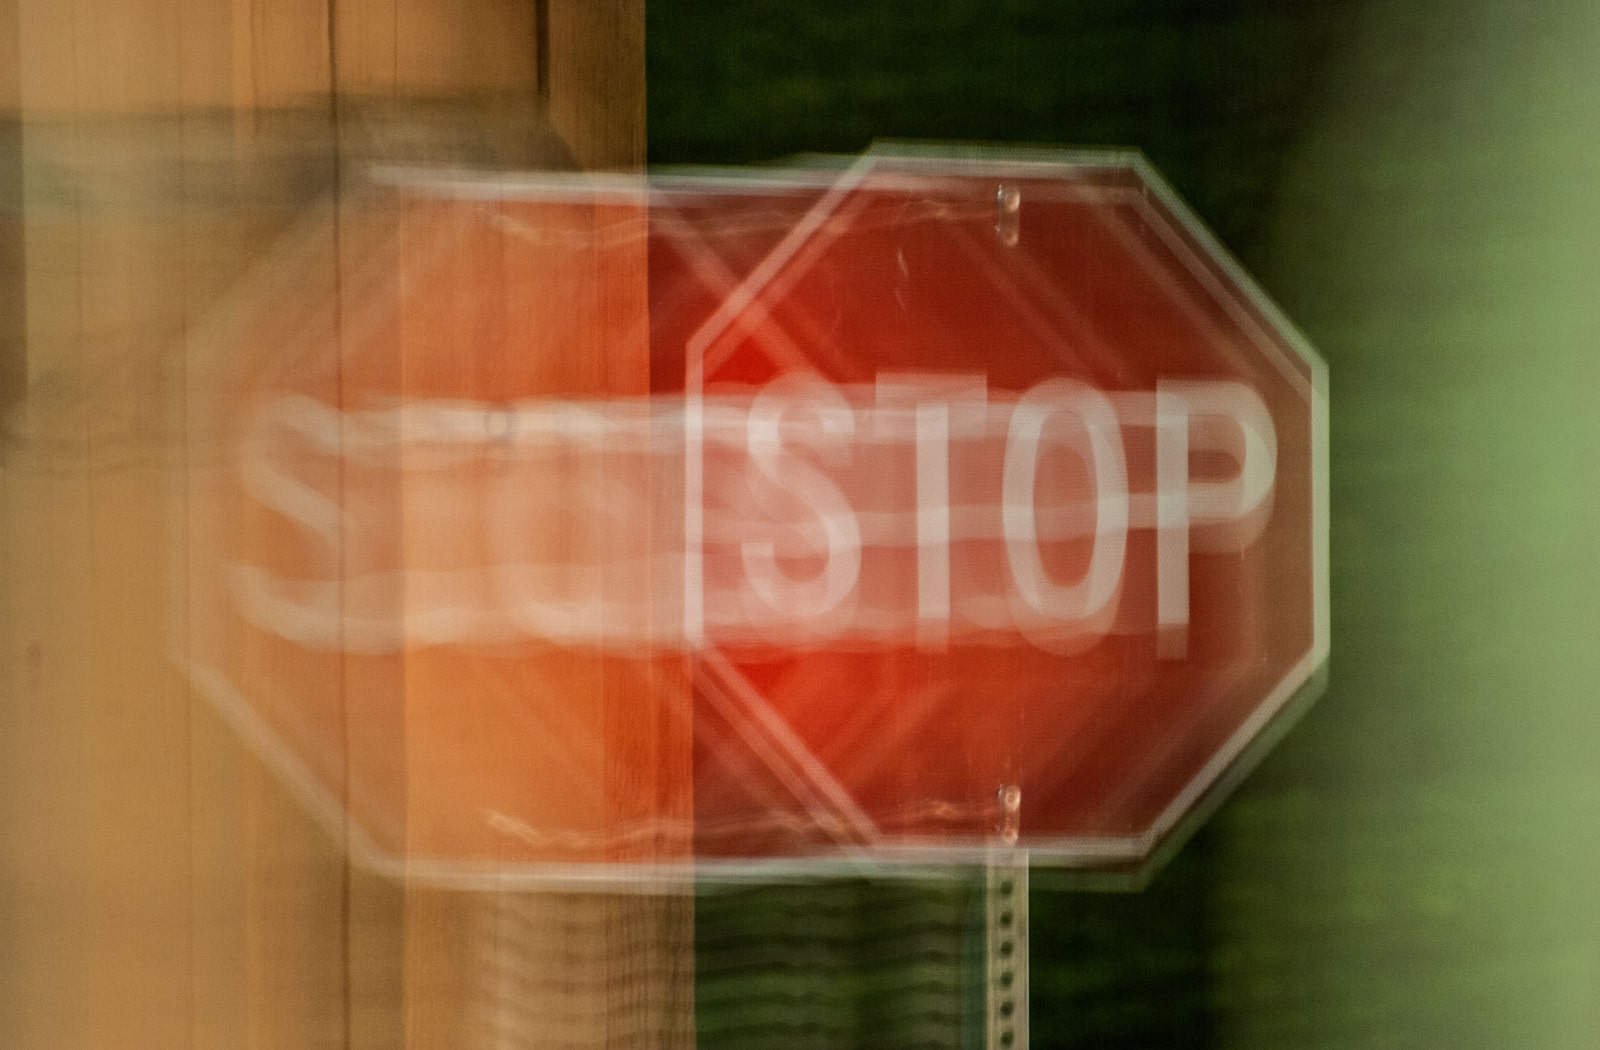 An image of a stop sign, but the image is distorted to reflect blurry vision